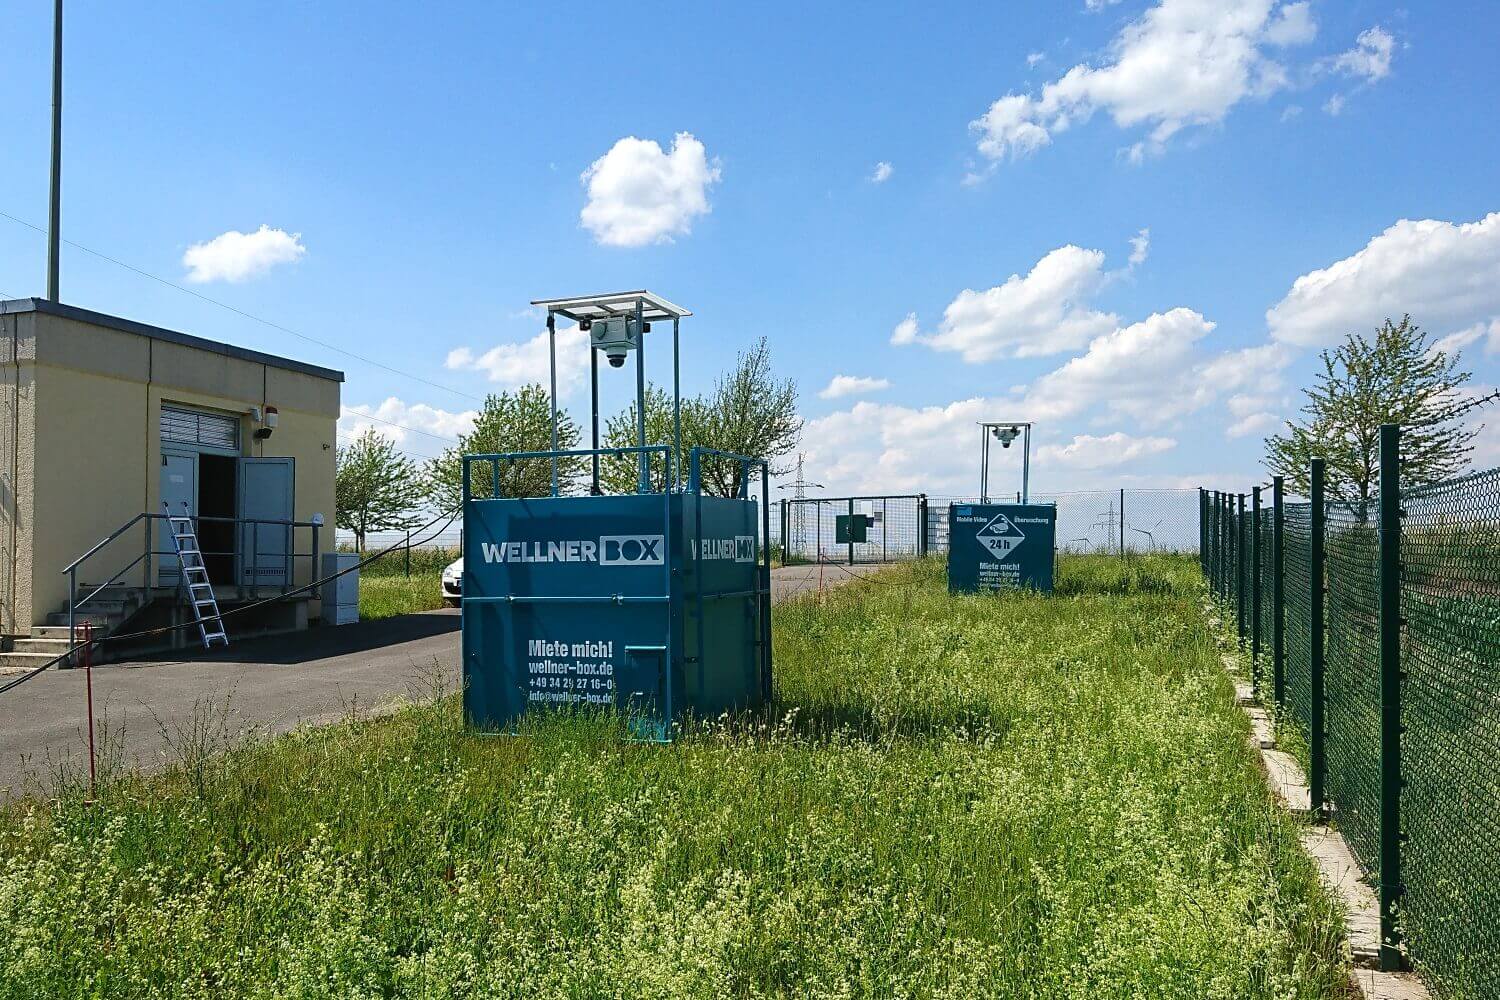 Combined against sabotage and theft - WellnerBOXes in a transformer station